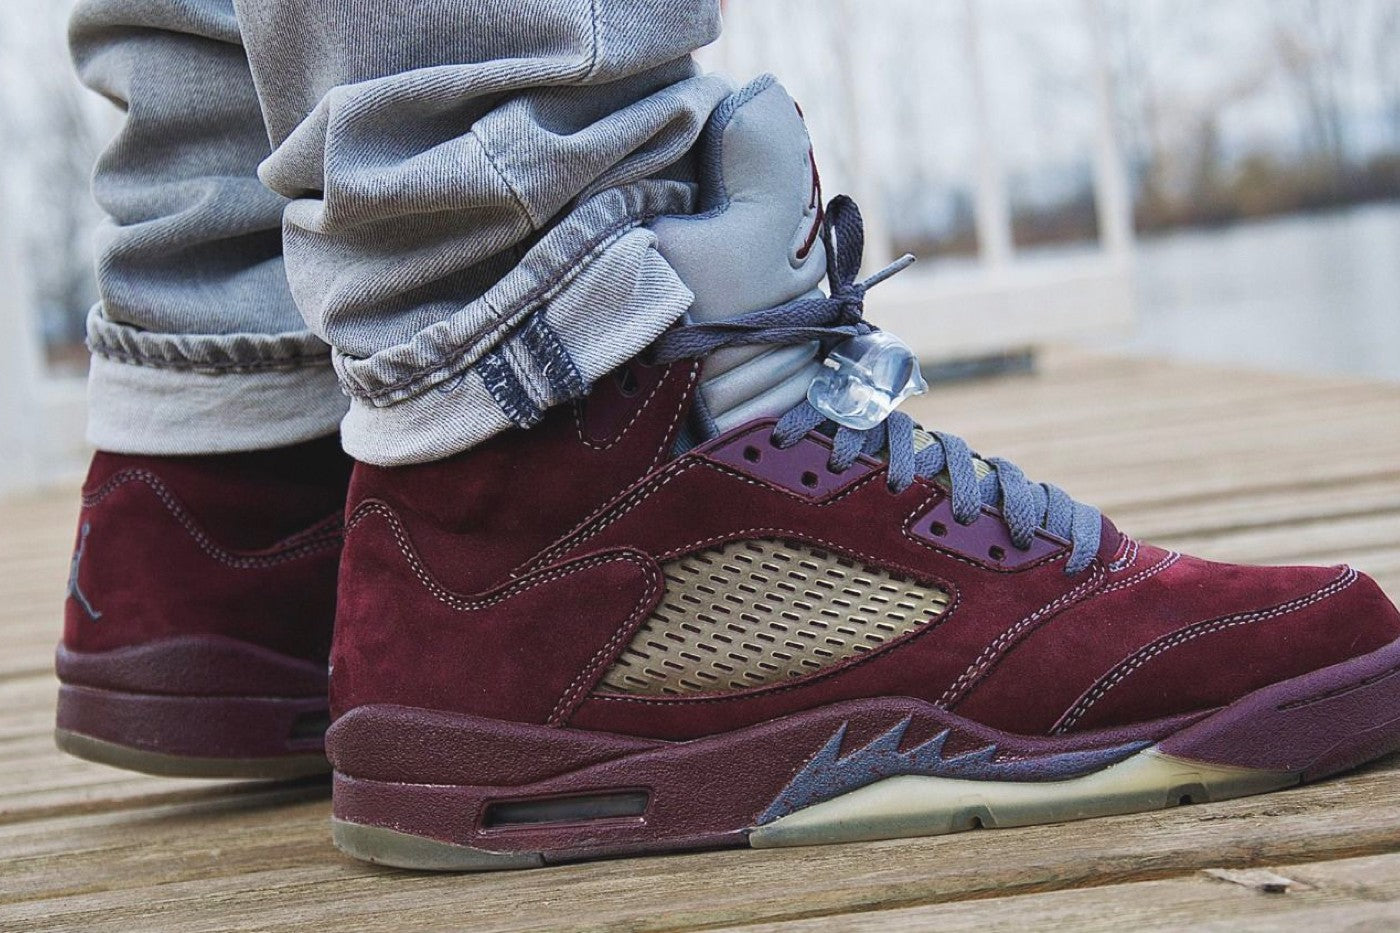 The Air Jordan 5 "Burgundy" is Officially Returning in 2023